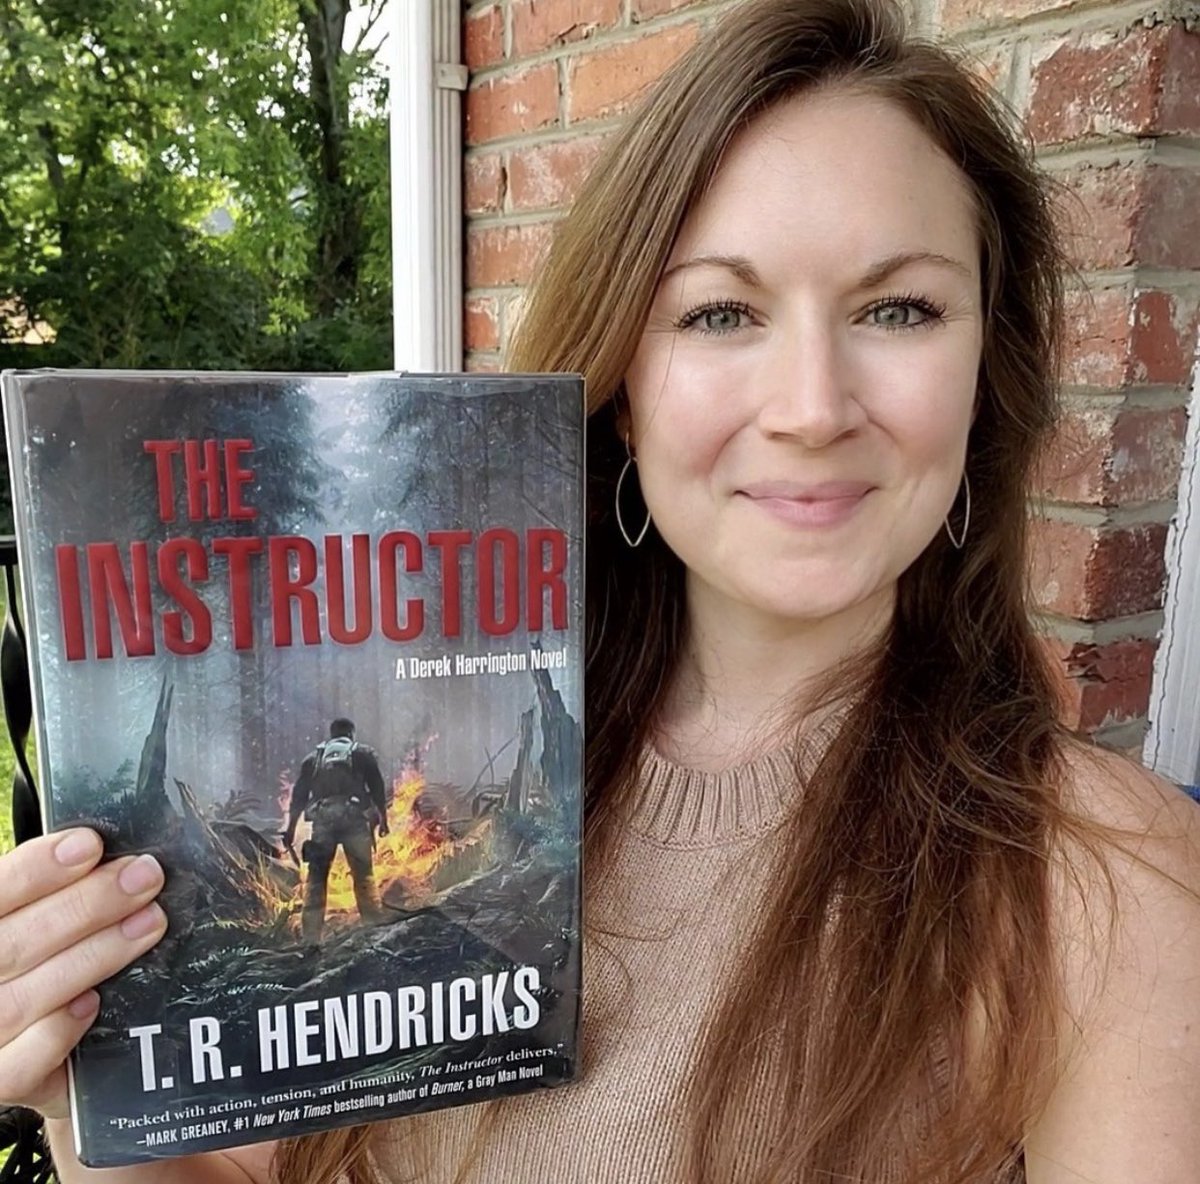 So grateful for Lauren Nossett’s incredible review of THE INSTRUCTOR! I’m currently devouring her debut THE RESEMBLANCE and cannot wait to return the favor with my review. (Hint - it’s no surprise that she won Best First Novel at this year’s #ThrillerFest).